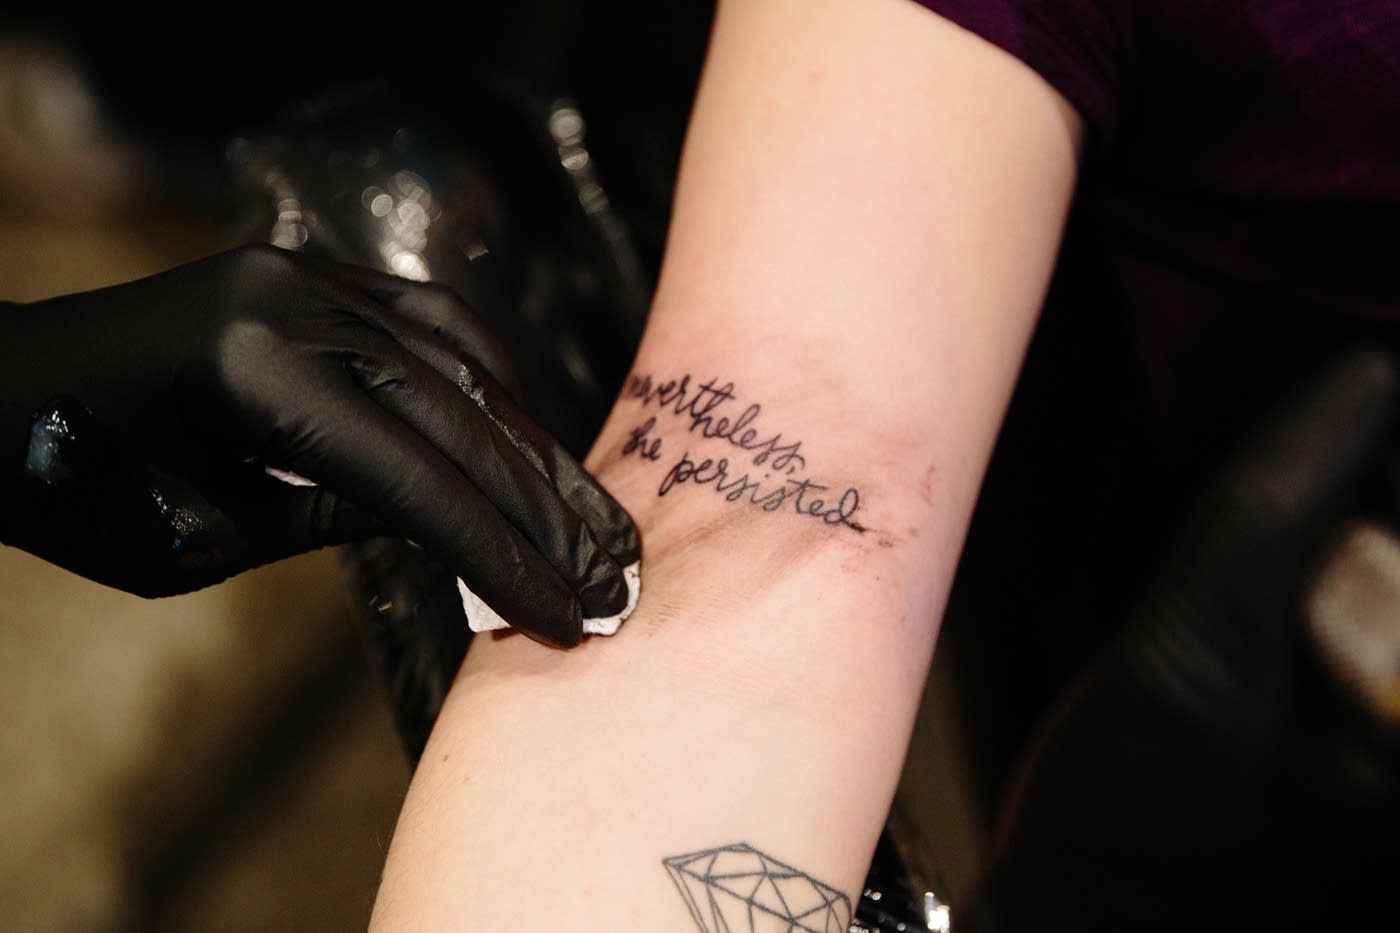 A fresh "nevertheless, she persisted" tattoo is wiped clean inside Brass Knuckle Tattoo Shop. Evan Frost | MPR News